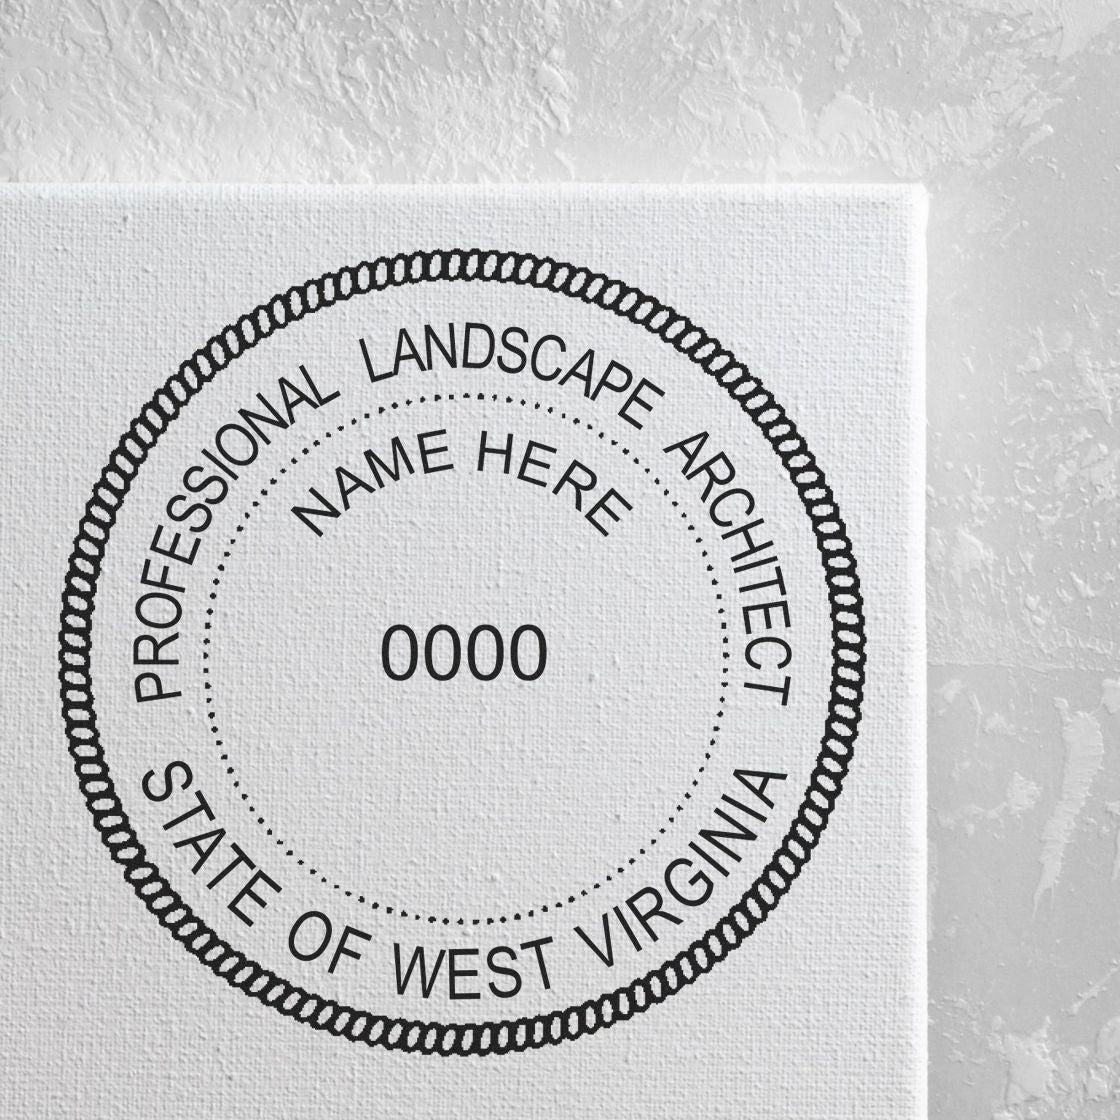 A stamped impression of the Digital West Virginia Landscape Architect Stamp in this stylish lifestyle photo, setting the tone for a unique and personalized product.